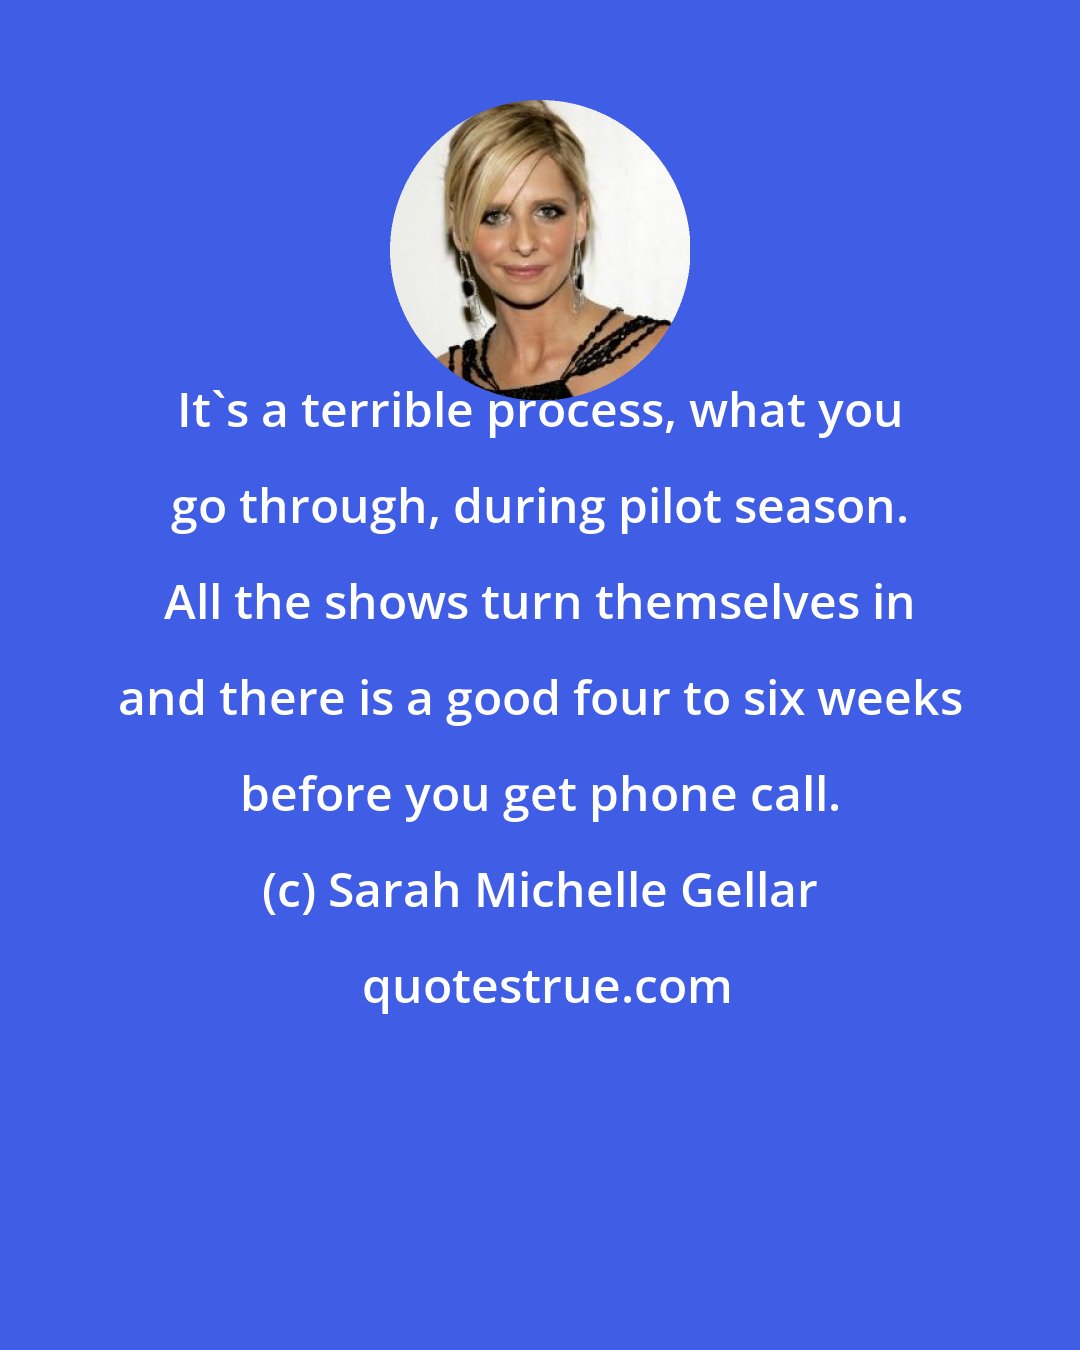 Sarah Michelle Gellar: It's a terrible process, what you go through, during pilot season. All the shows turn themselves in and there is a good four to six weeks before you get phone call.